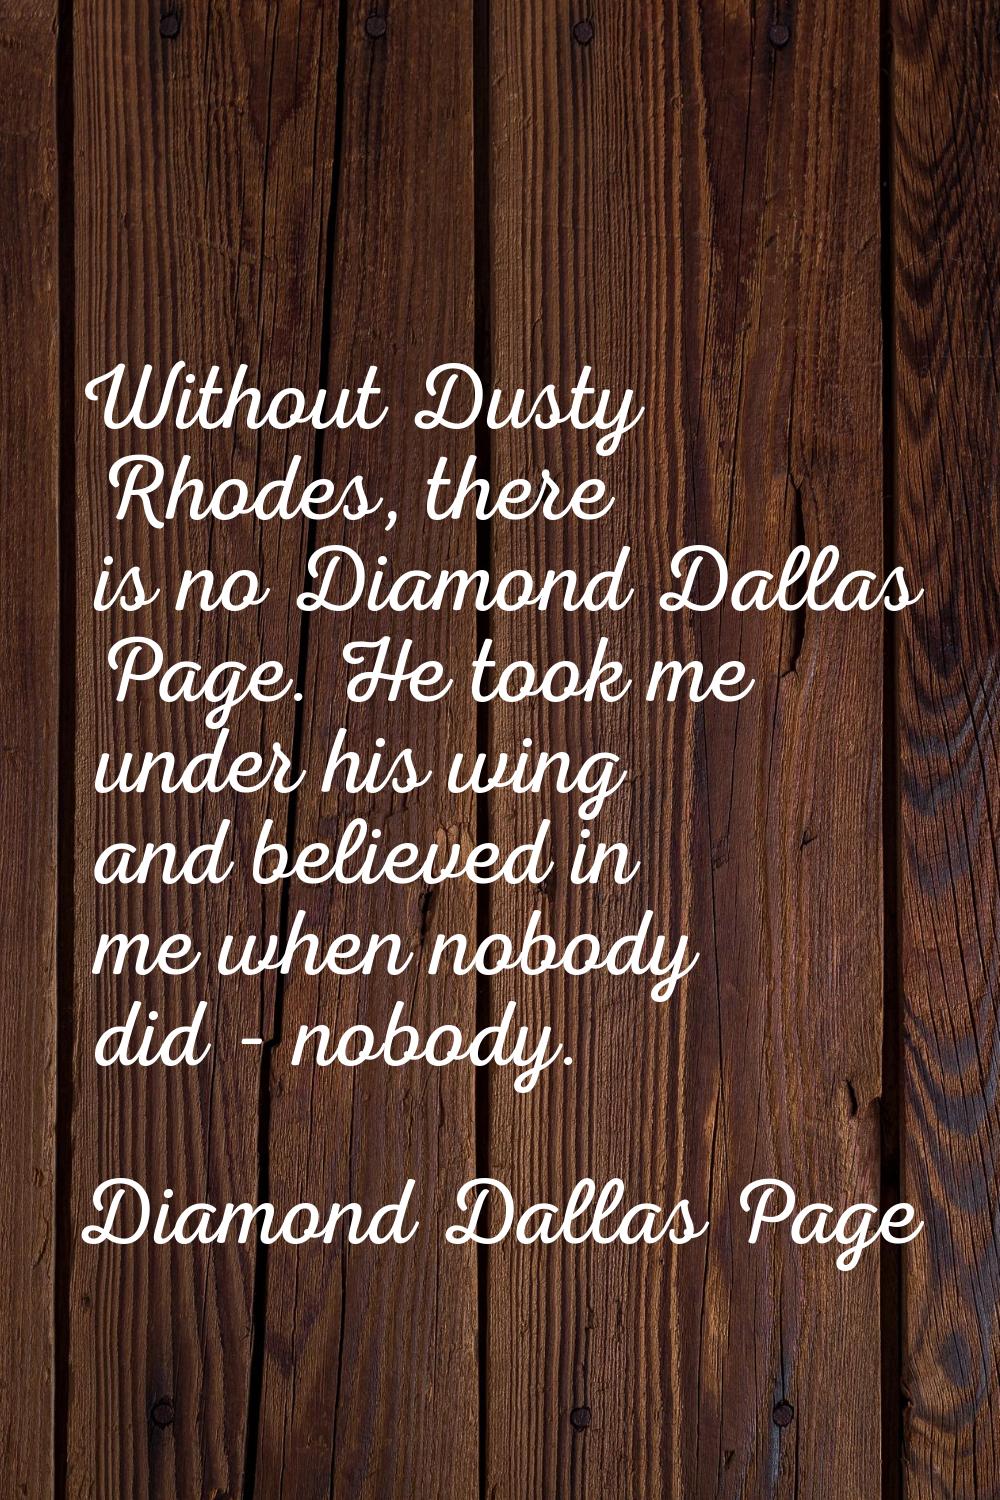 Without Dusty Rhodes, there is no Diamond Dallas Page. He took me under his wing and believed in me